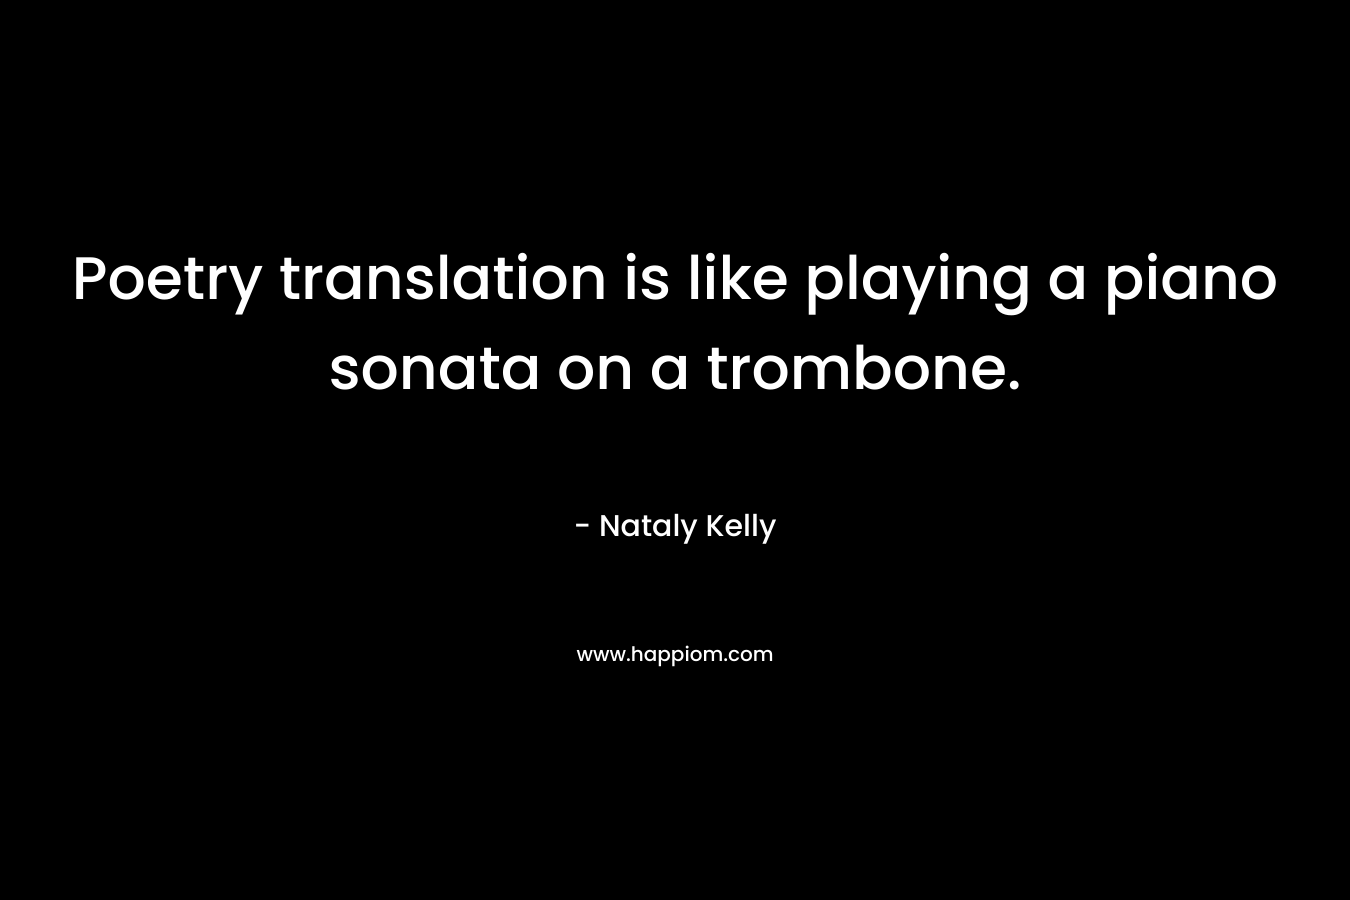 Poetry translation is like playing a piano sonata on a trombone. – Nataly Kelly